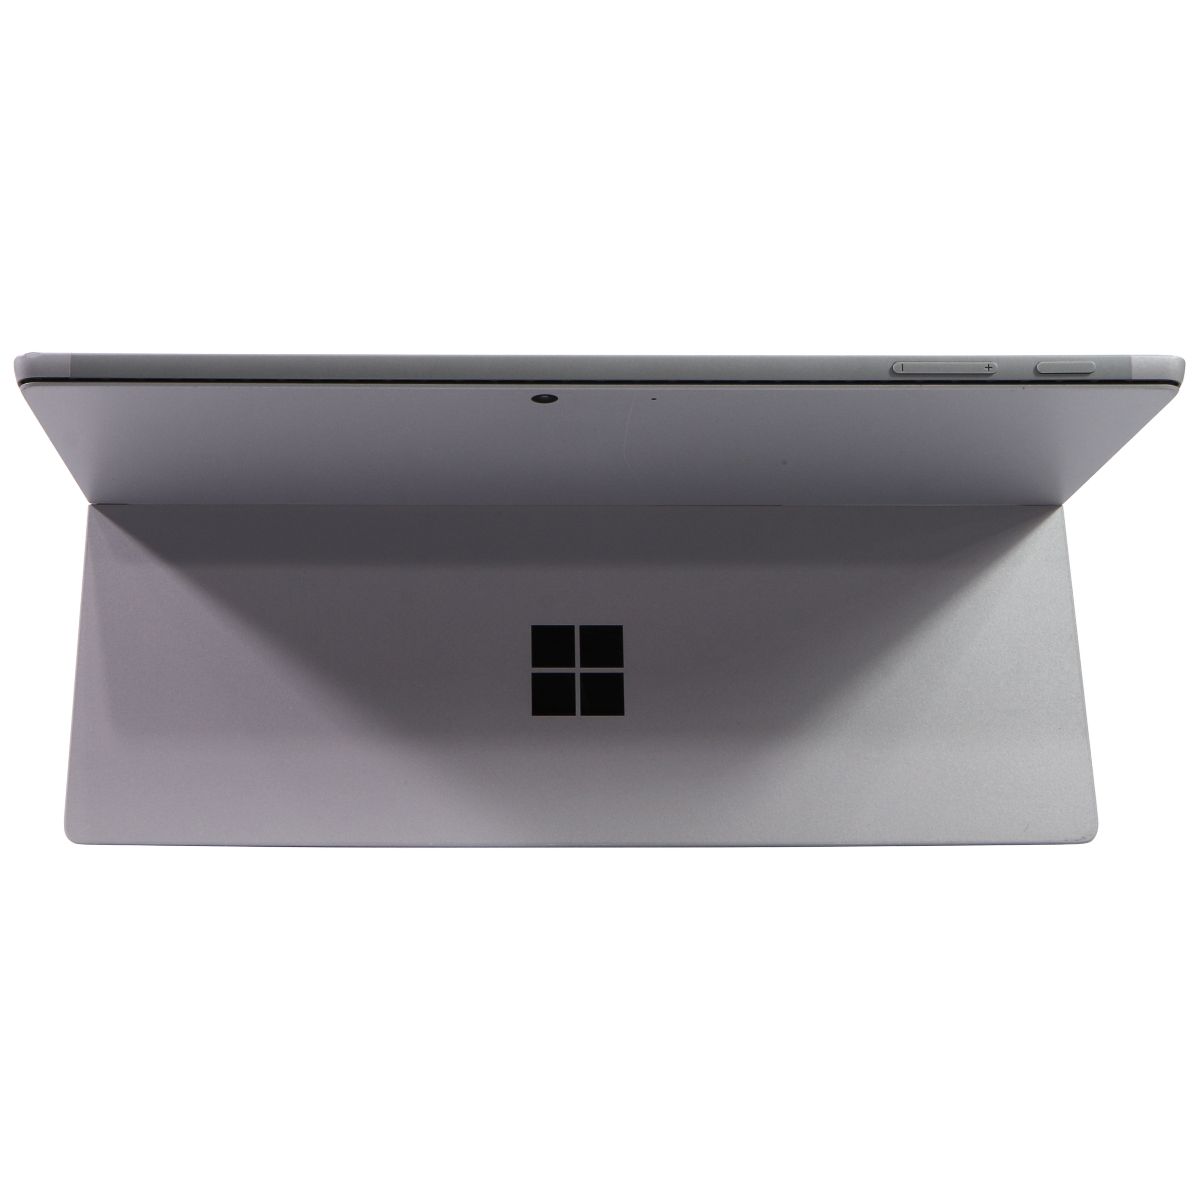 Microsoft Surface Pro 7 Tablet (1866) - 128GB SSD / 4GB RAM / i3-1005G1 - Silver iPads, Tablets & eBook Readers Microsoft    - Simple Cell Bulk Wholesale Pricing - USA Seller